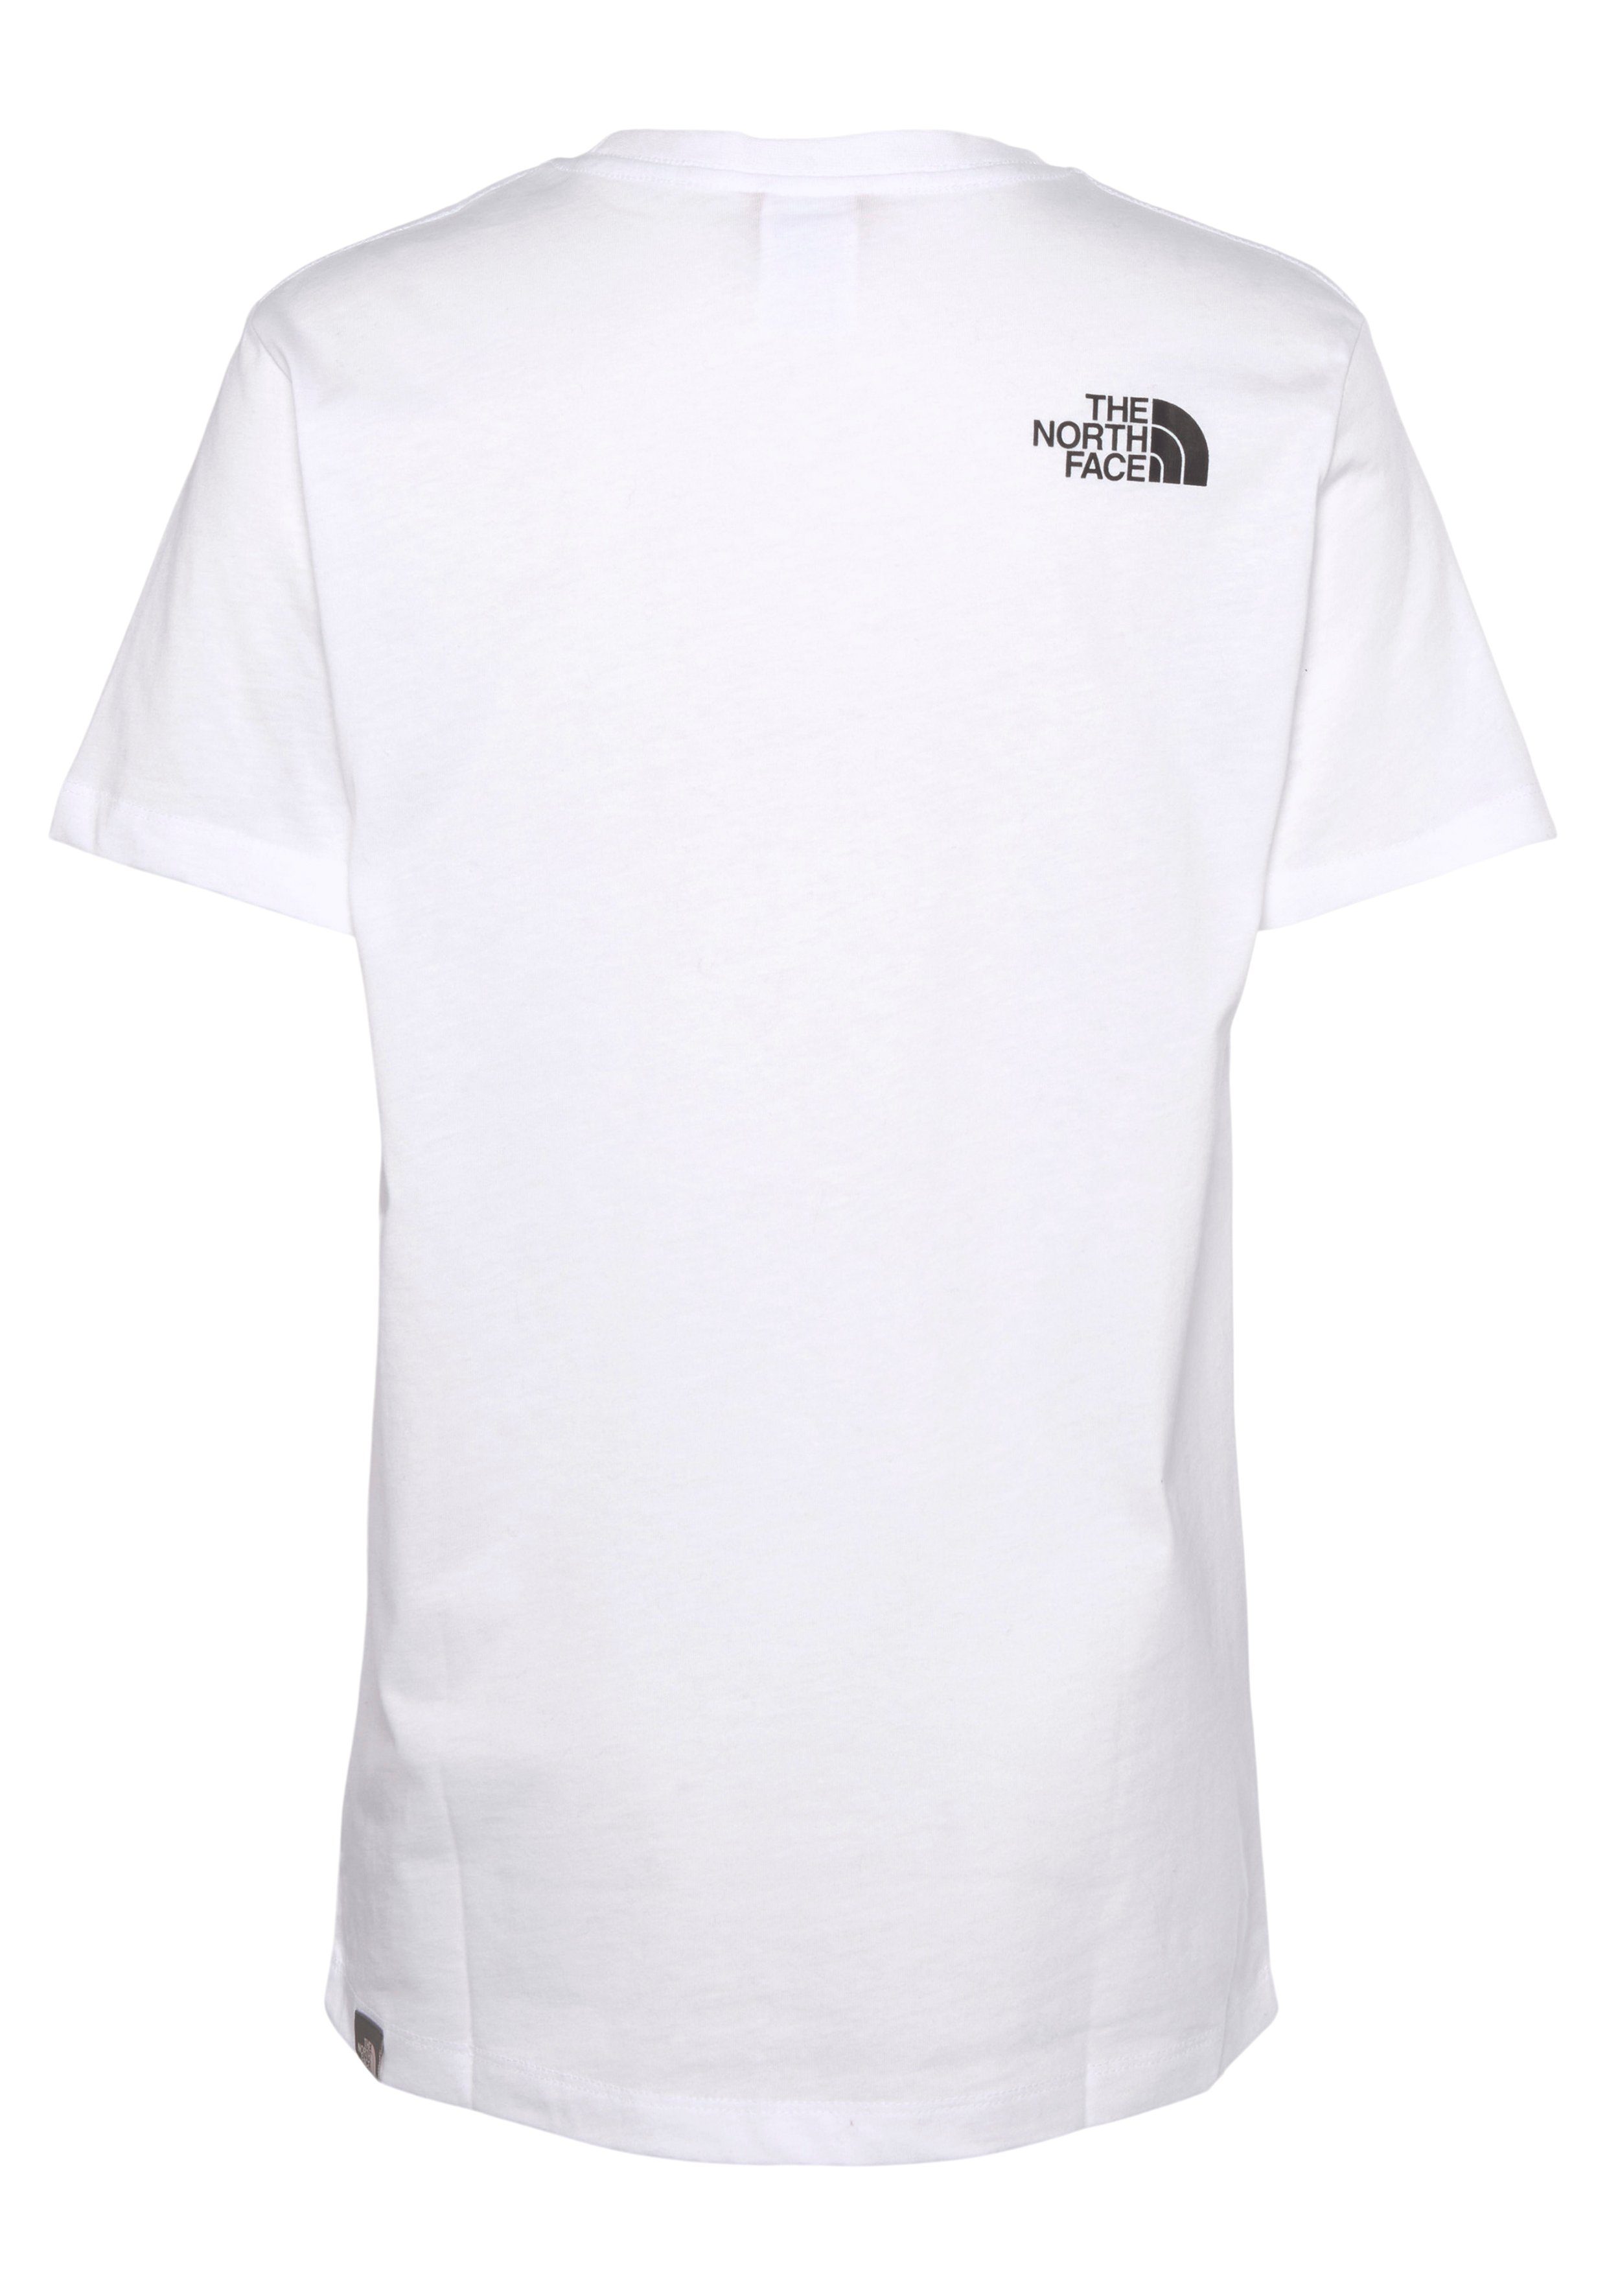 Kinder TEE EASY Face - North white The für T-Shirt